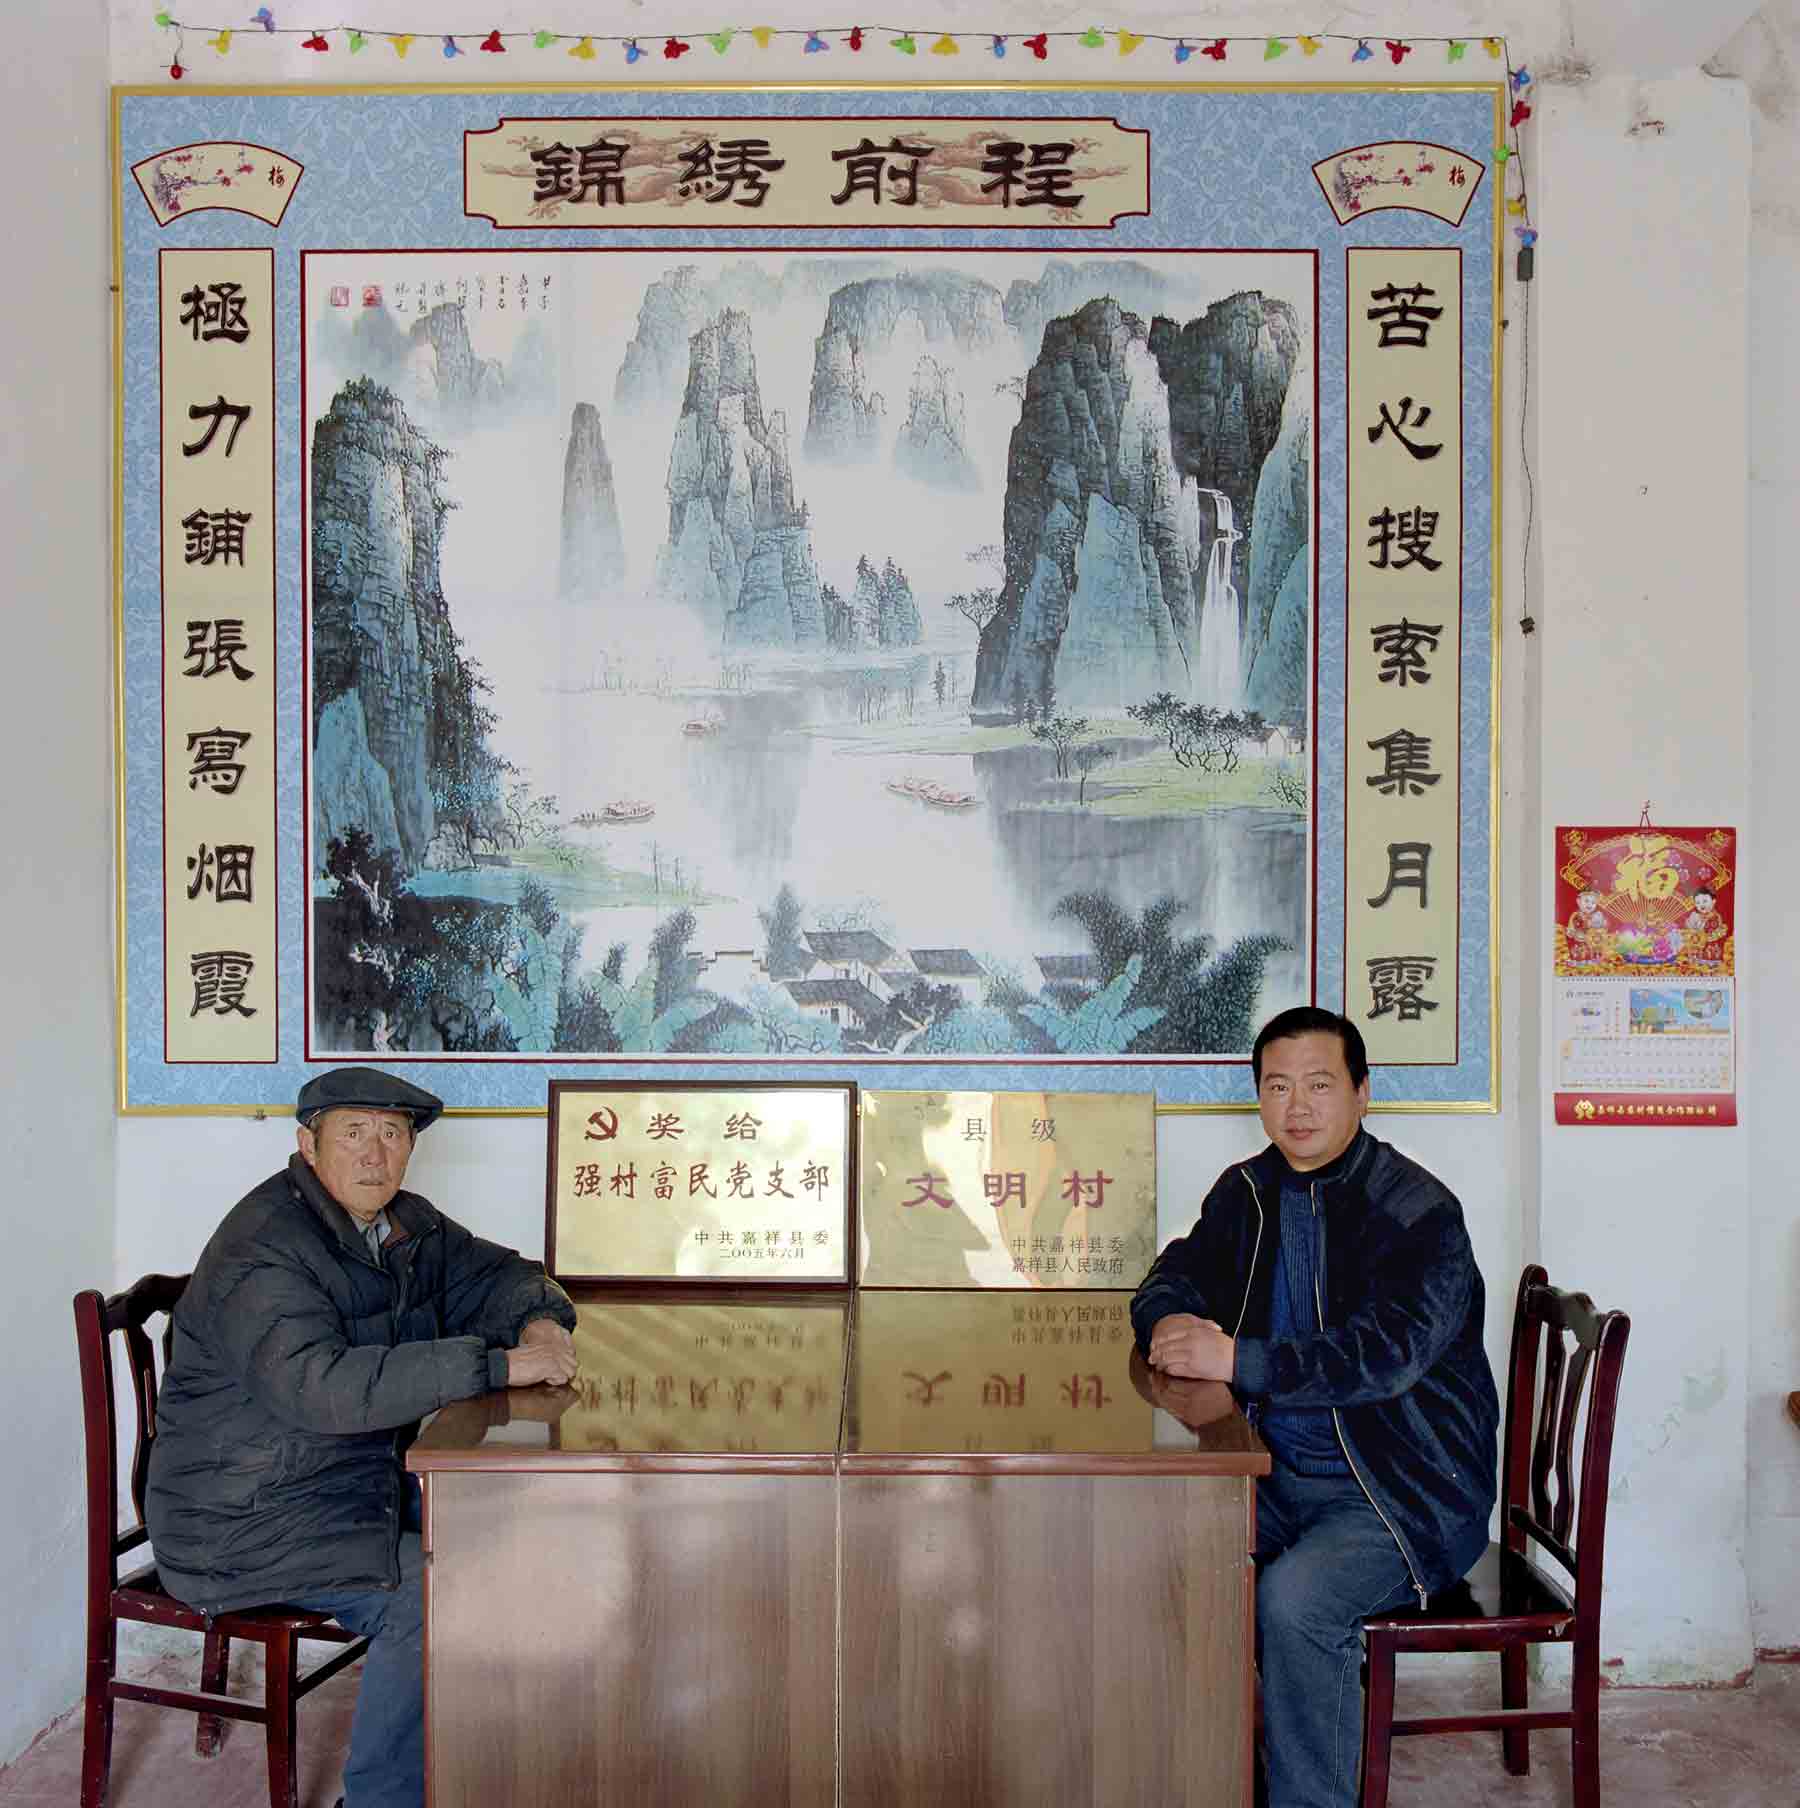 China-10/2007 [Cui, CW (b. 1943)/CG (b. 1969)]
Cui Weihang (left, b. 1943) is village chief of Cui, and Cui Gongli (b. 1969) is party secretary of the Chinese Communist Party in Cui (population 2,300), which is in Tuanli Town, Jiaxiang County, a part of Jining City, Shandong province. Monthly salary for the village chief: no payment. Monthly salary for the party secretary: 280 renminbi ($ 35, 26 euro)